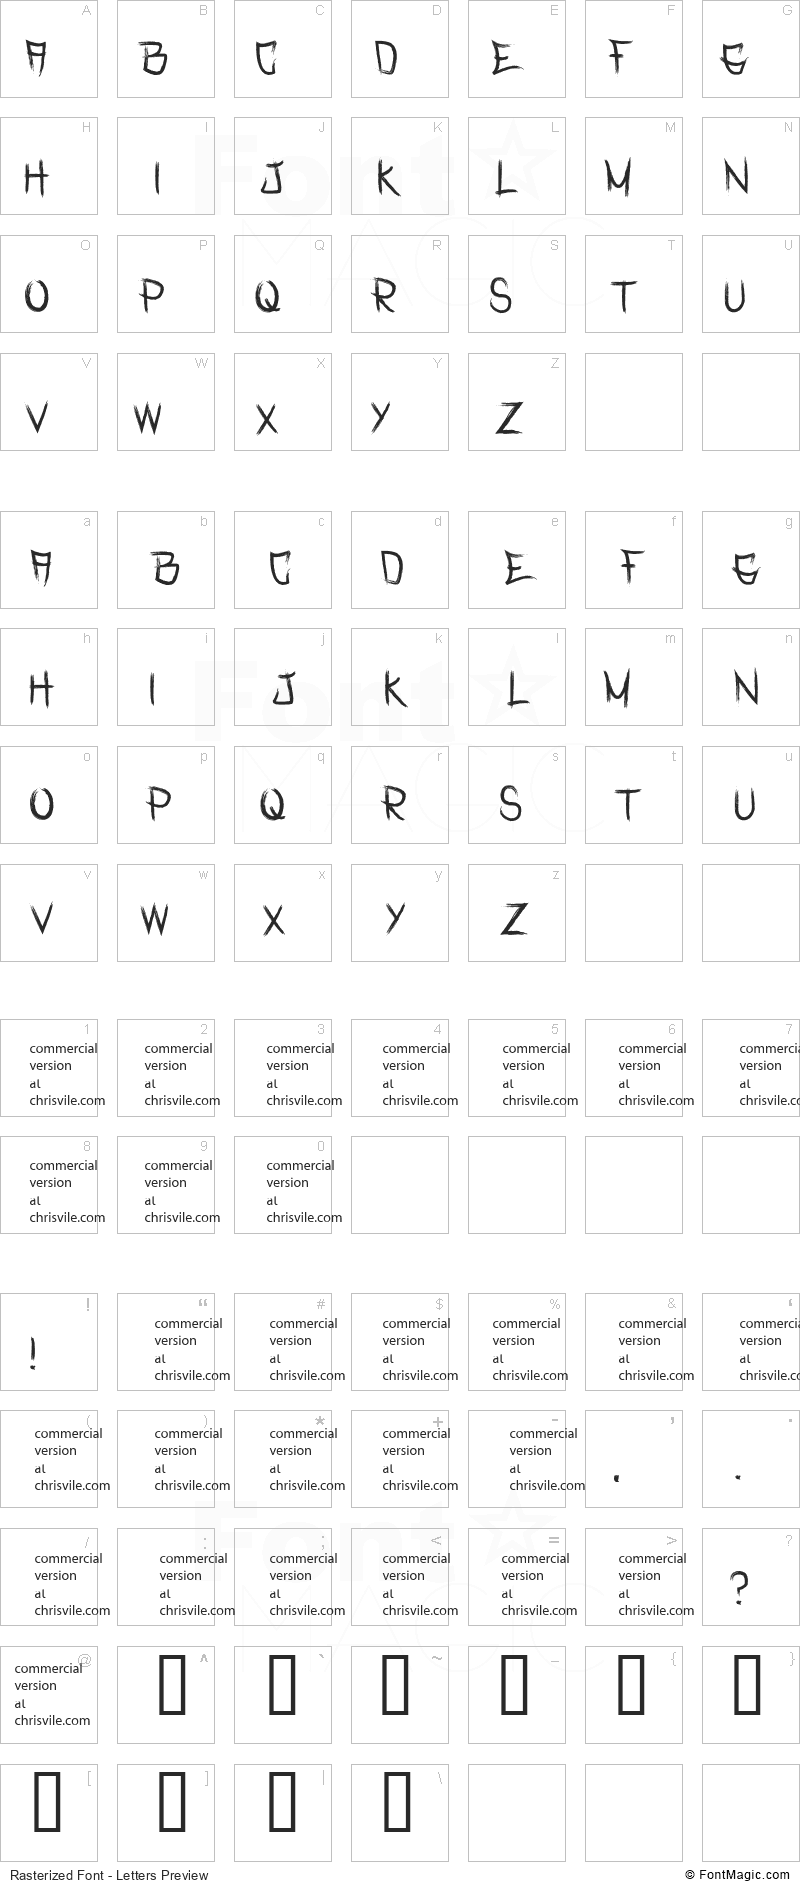 Rasterized Font - All Latters Preview Chart